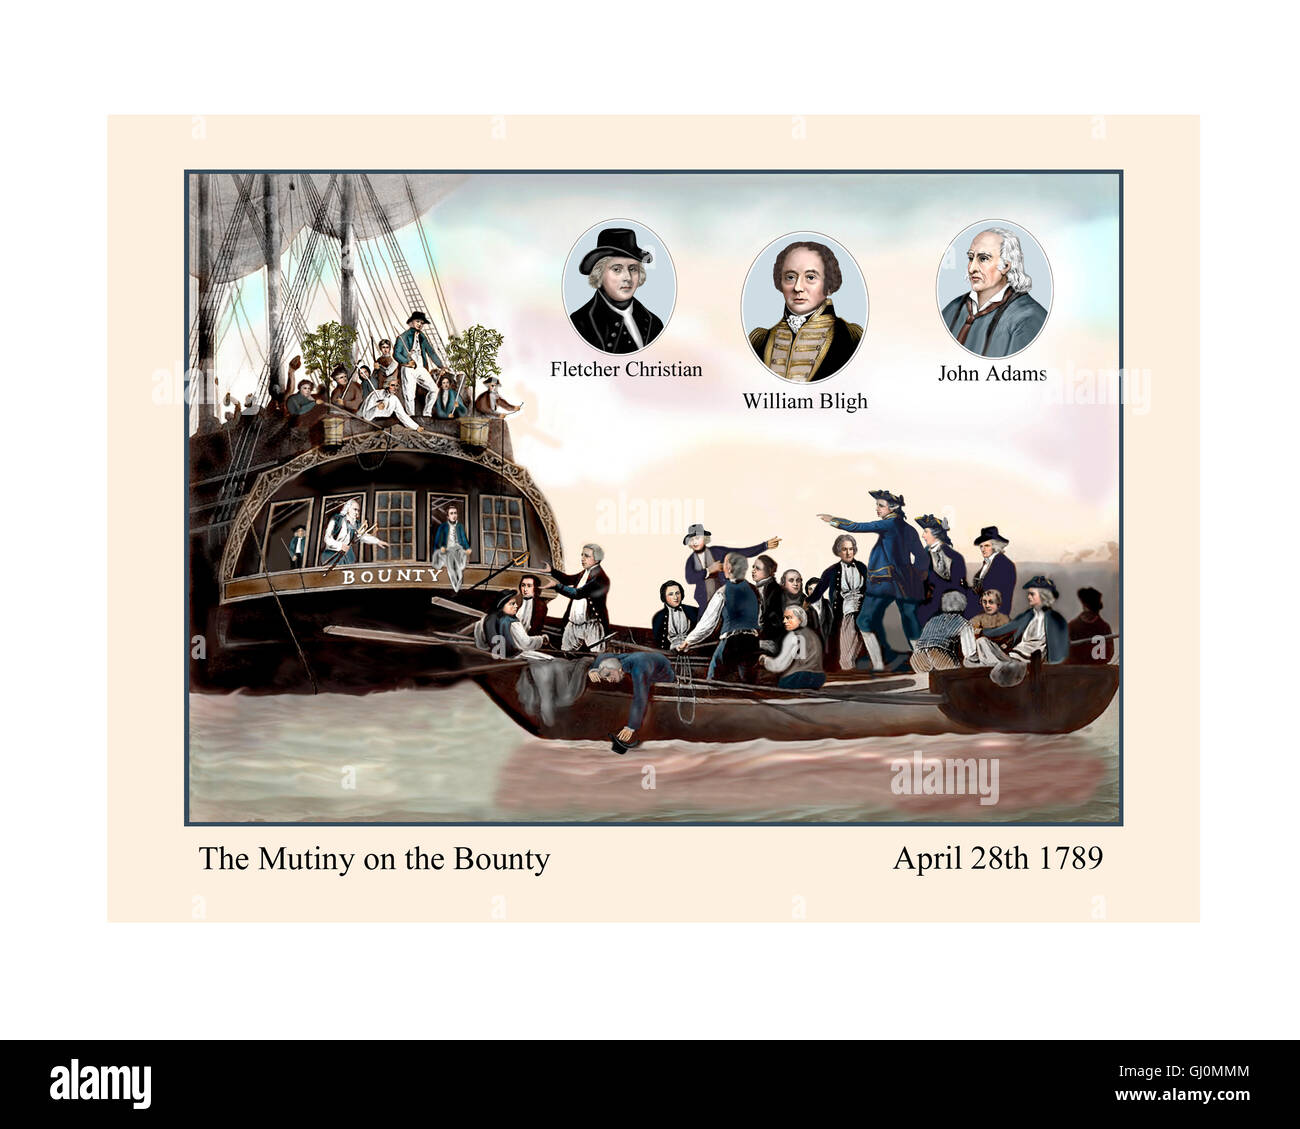 Mutiny on the Bounty 28 April 1789, illustration from a 19th century print sharpened, re-set, re-coloured with 3 added portraits Stock Photo